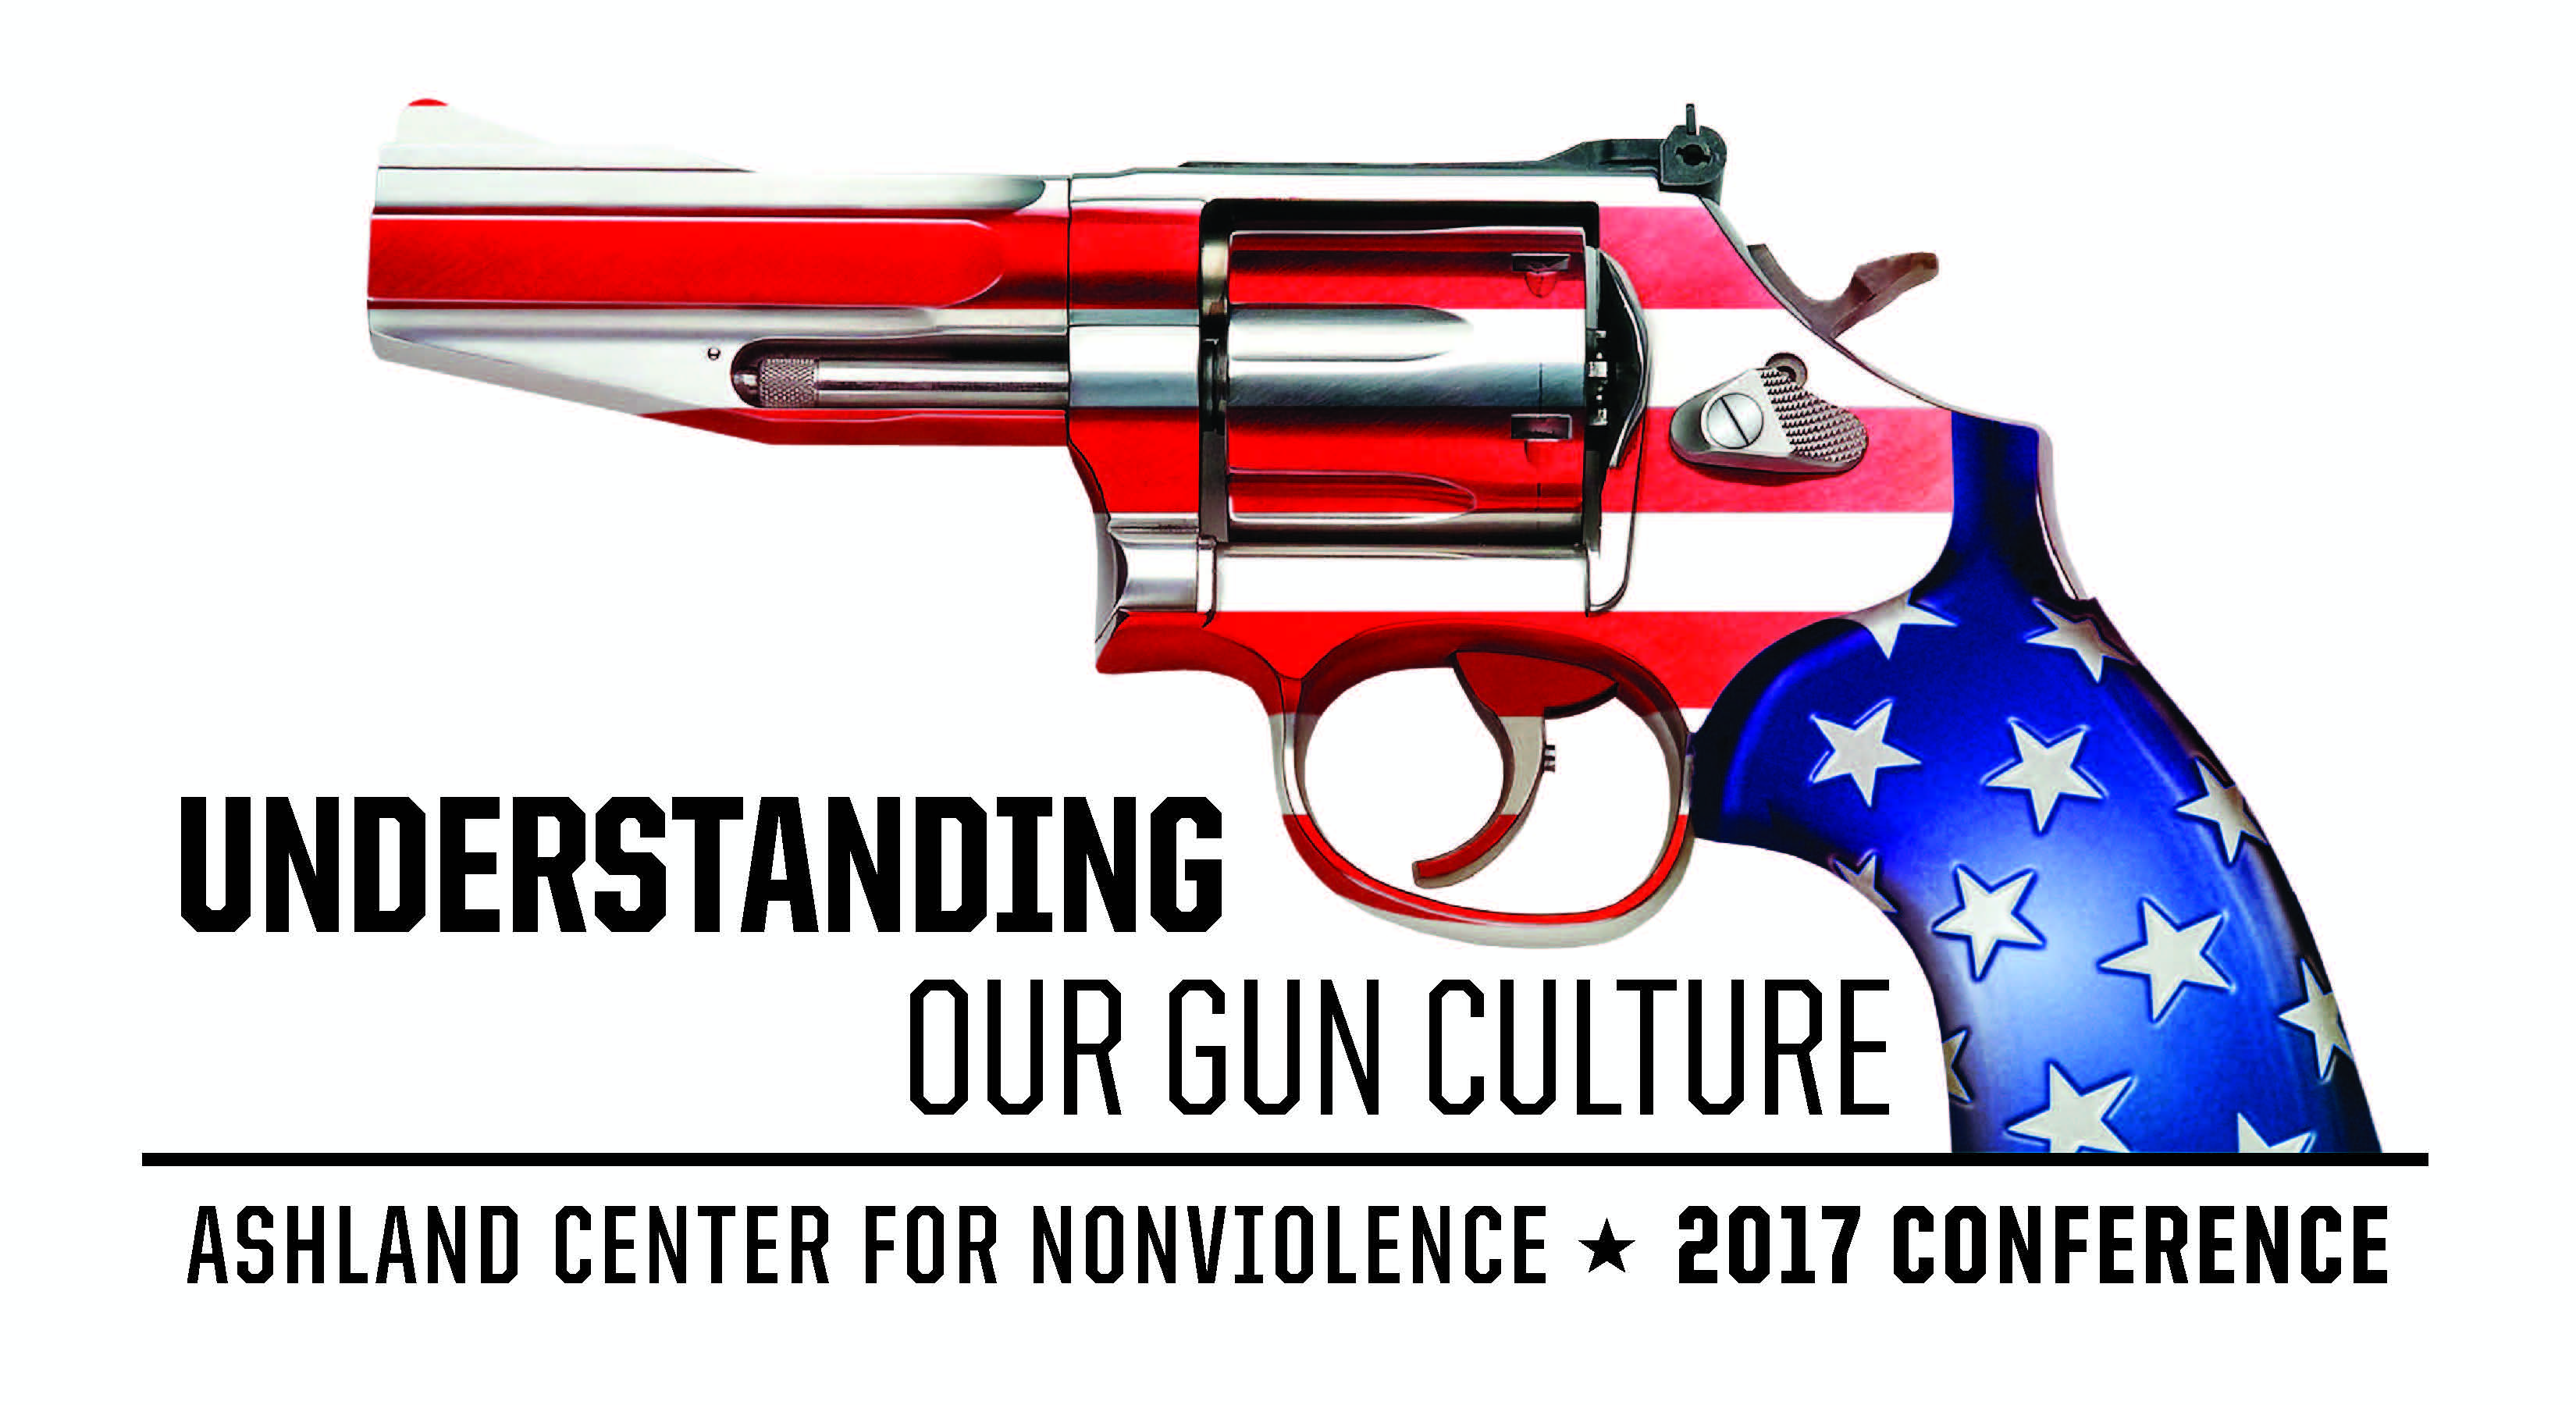 The goal of this conference is to gain insight about the complex issues associated with the widespread availability and use of guns in American society. In order to enhance the discussion, we are seeking to understand the issues through evidence-based presentations from a variety of academic disciplines. Both theoretical and practical considerations are welcome. While some presentations may address practical solutions for enhancing gun safety or minimizing gun violence, the main focus should be upon understanding the issue rather than advocating for particular viewpoints.
